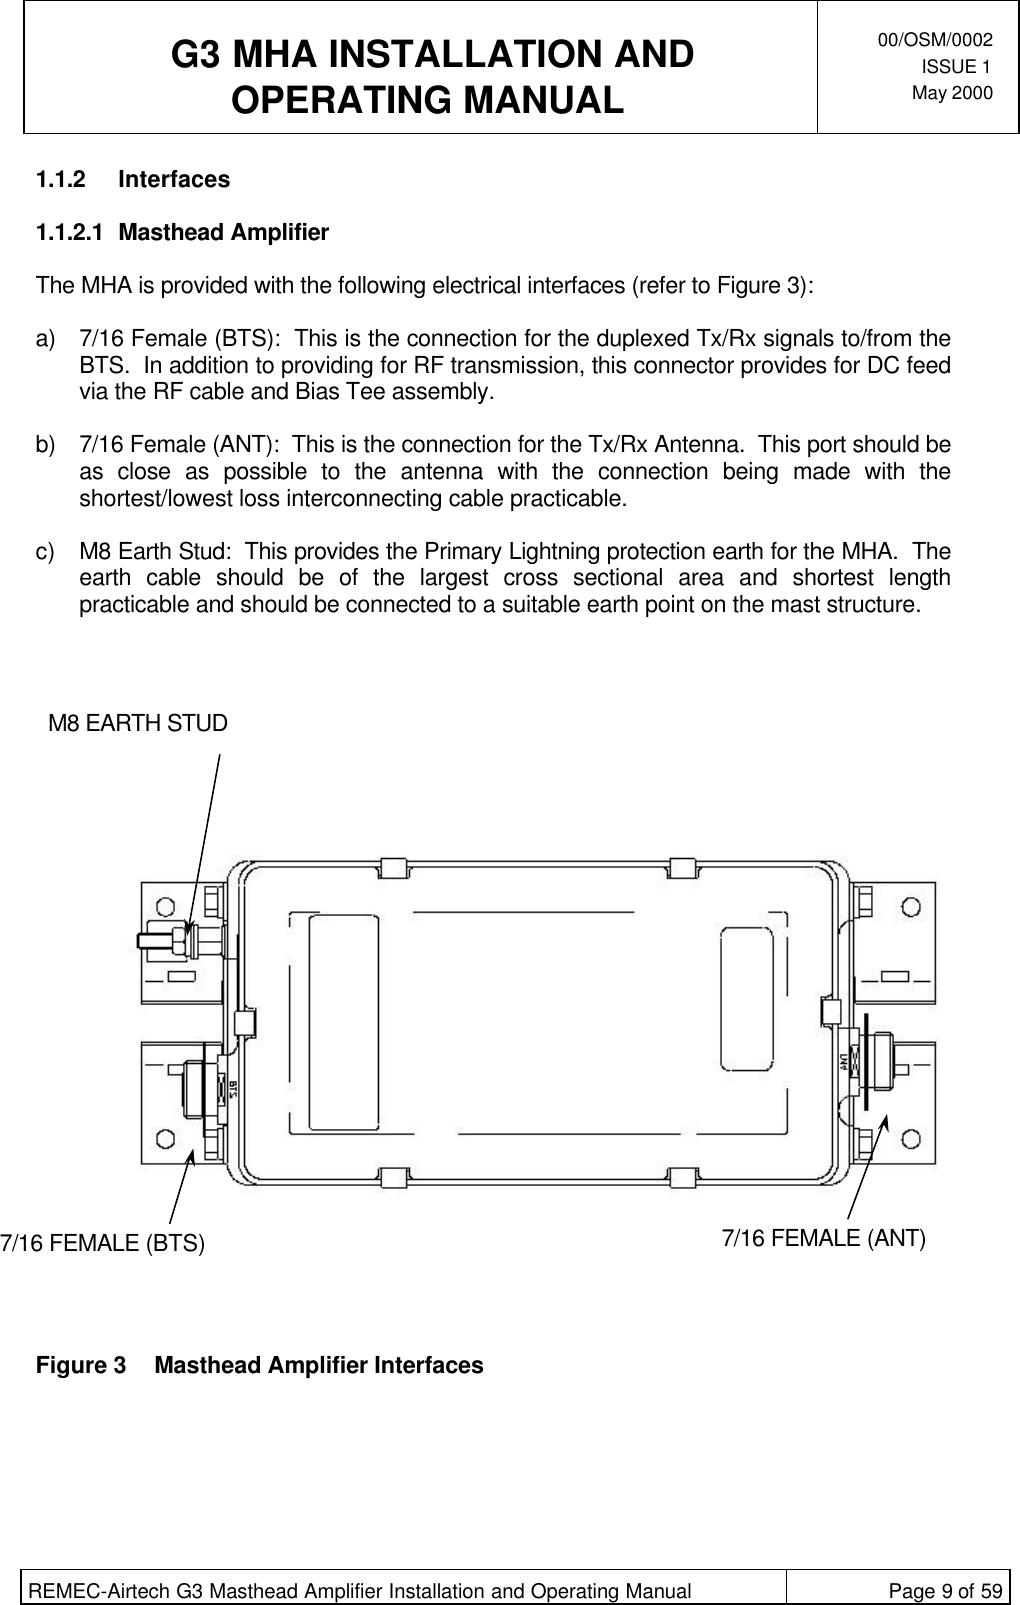  G3 MHA INSTALLATION ANDOPERATING MANUAL00/OSM/0002ISSUE 1May 2000REMEC-Airtech G3 Masthead Amplifier Installation and Operating Manual Page 9 of 591.1.2 Interfaces1.1.2.1 Masthead AmplifierThe MHA is provided with the following electrical interfaces (refer to Figure 3):a) 7/16 Female (BTS):  This is the connection for the duplexed Tx/Rx signals to/from theBTS.  In addition to providing for RF transmission, this connector provides for DC feedvia the RF cable and Bias Tee assembly. b) 7/16 Female (ANT):  This is the connection for the Tx/Rx Antenna.  This port should beas close as possible to the antenna with the connection being made with theshortest/lowest loss interconnecting cable practicable. c) M8 Earth Stud:  This provides the Primary Lightning protection earth for the MHA.  Theearth cable should be of the largest cross sectional area and shortest lengthpracticable and should be connected to a suitable earth point on the mast structure.Figure 3Masthead Amplifier Interfaces7/16 FEMALE (BTS)M8 EARTH STUD7/16 FEMALE (ANT)